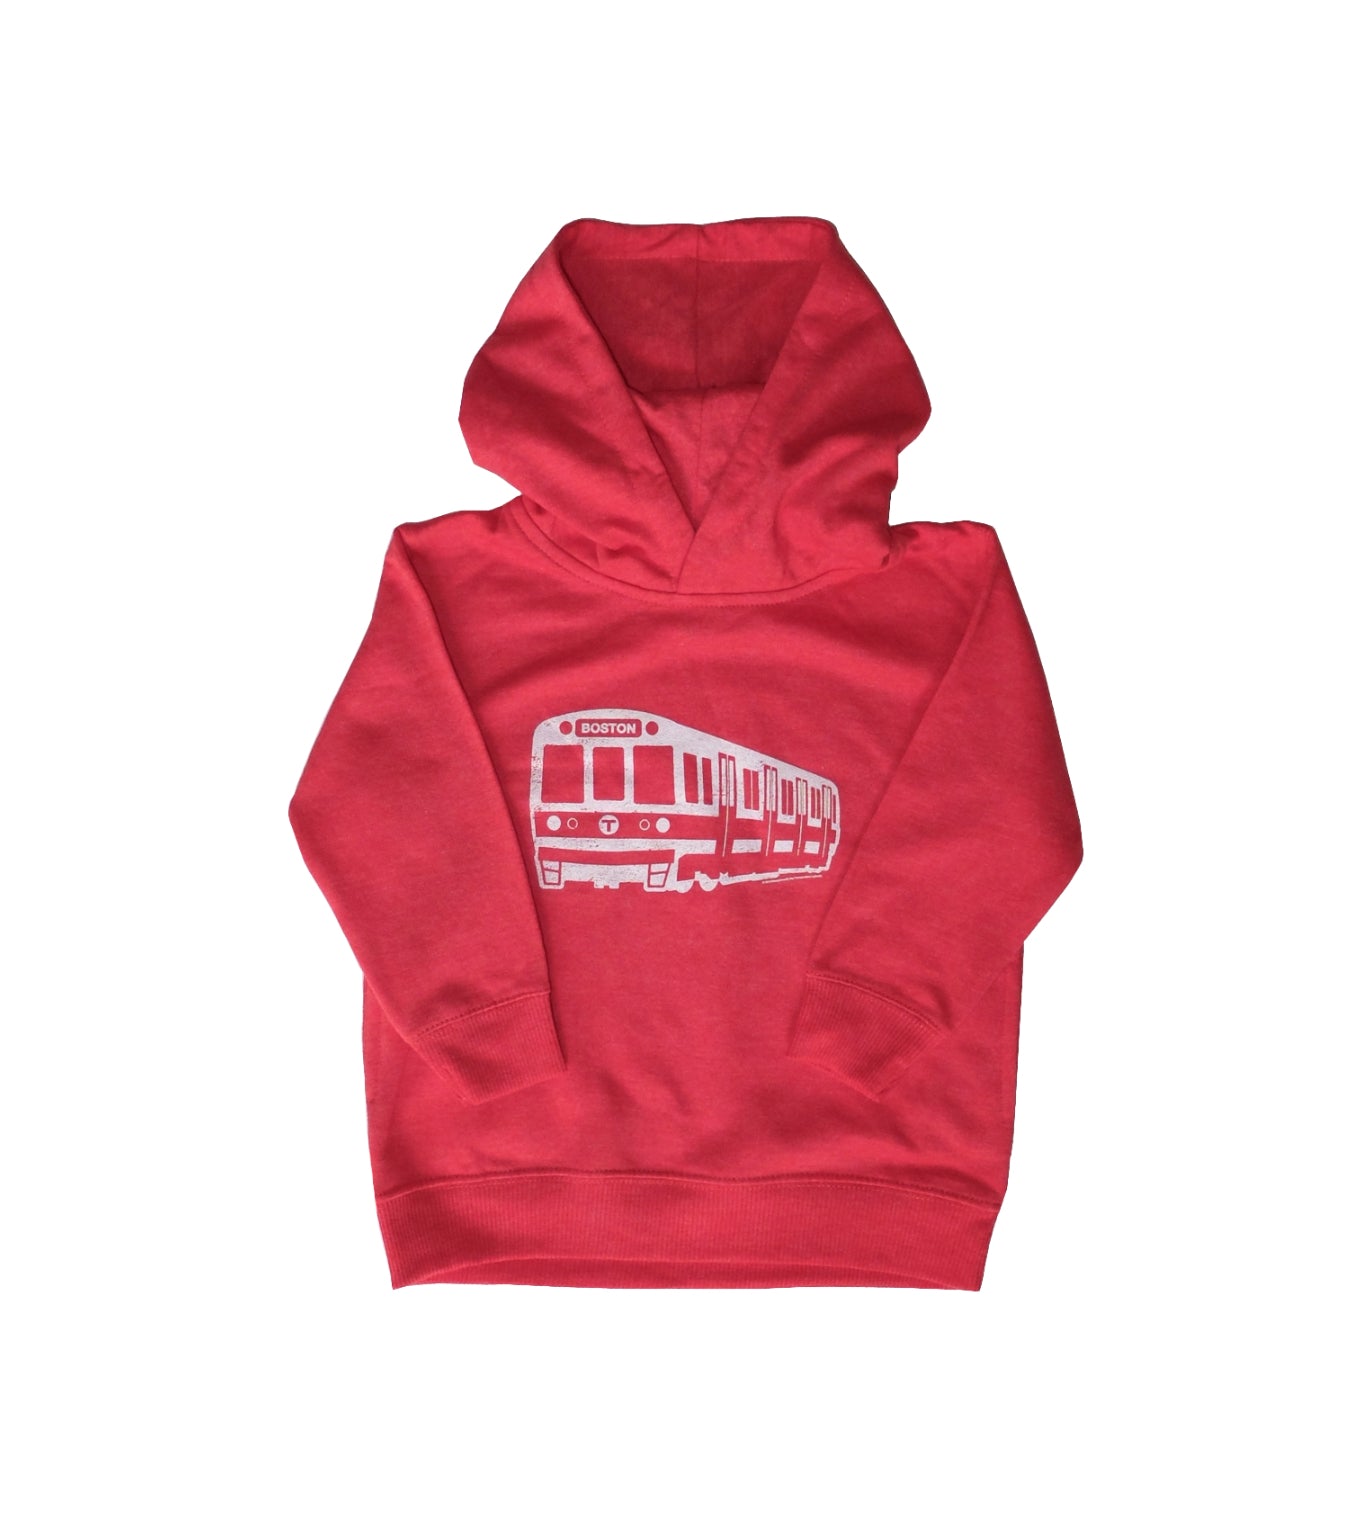 Red Hoodie with White MBTA Red Line Subway Car